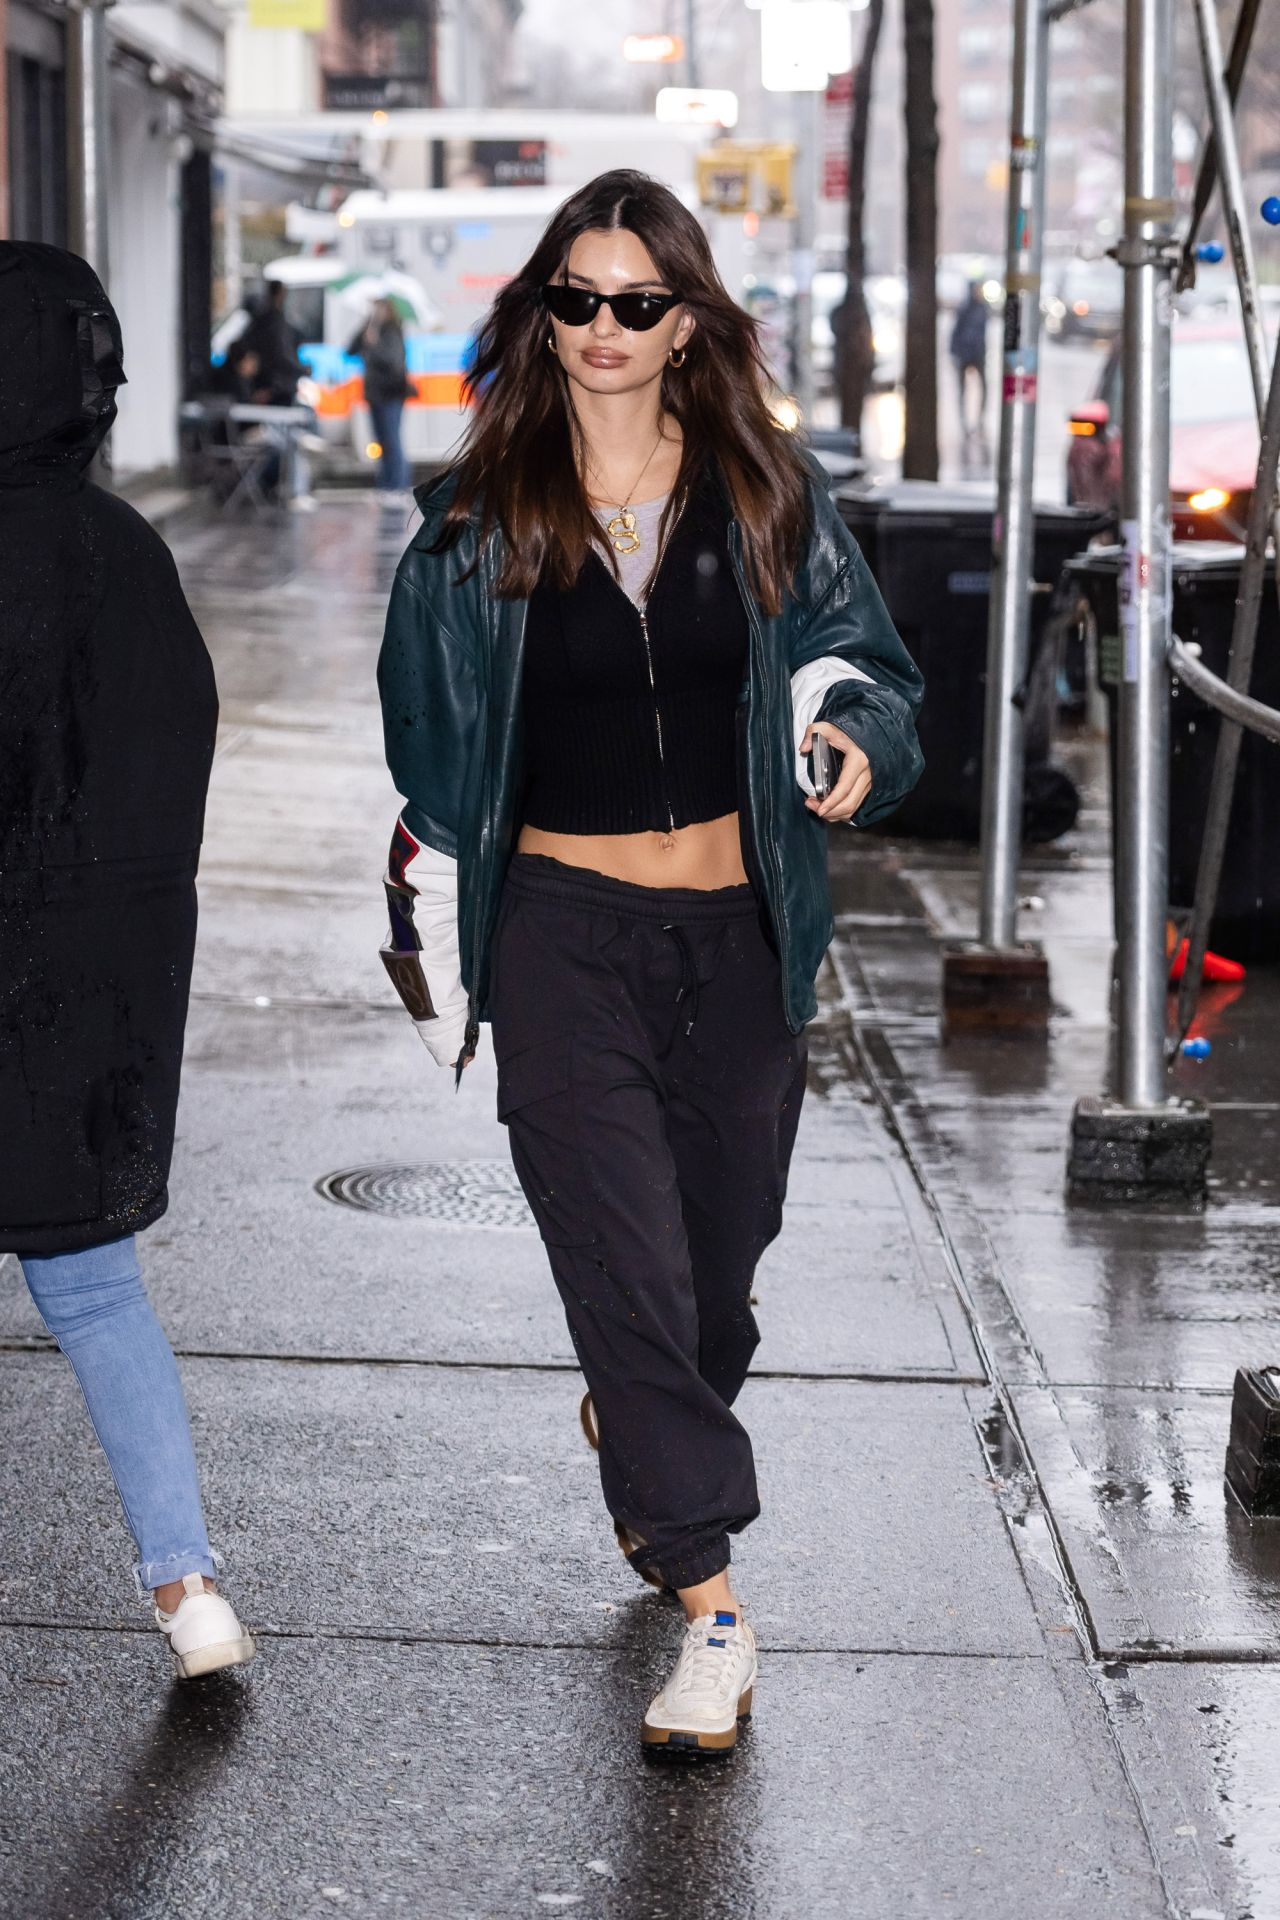 Emily Ratajkowski Style, Clothes, Outfits and Fashion• Page 2 of 150 ...